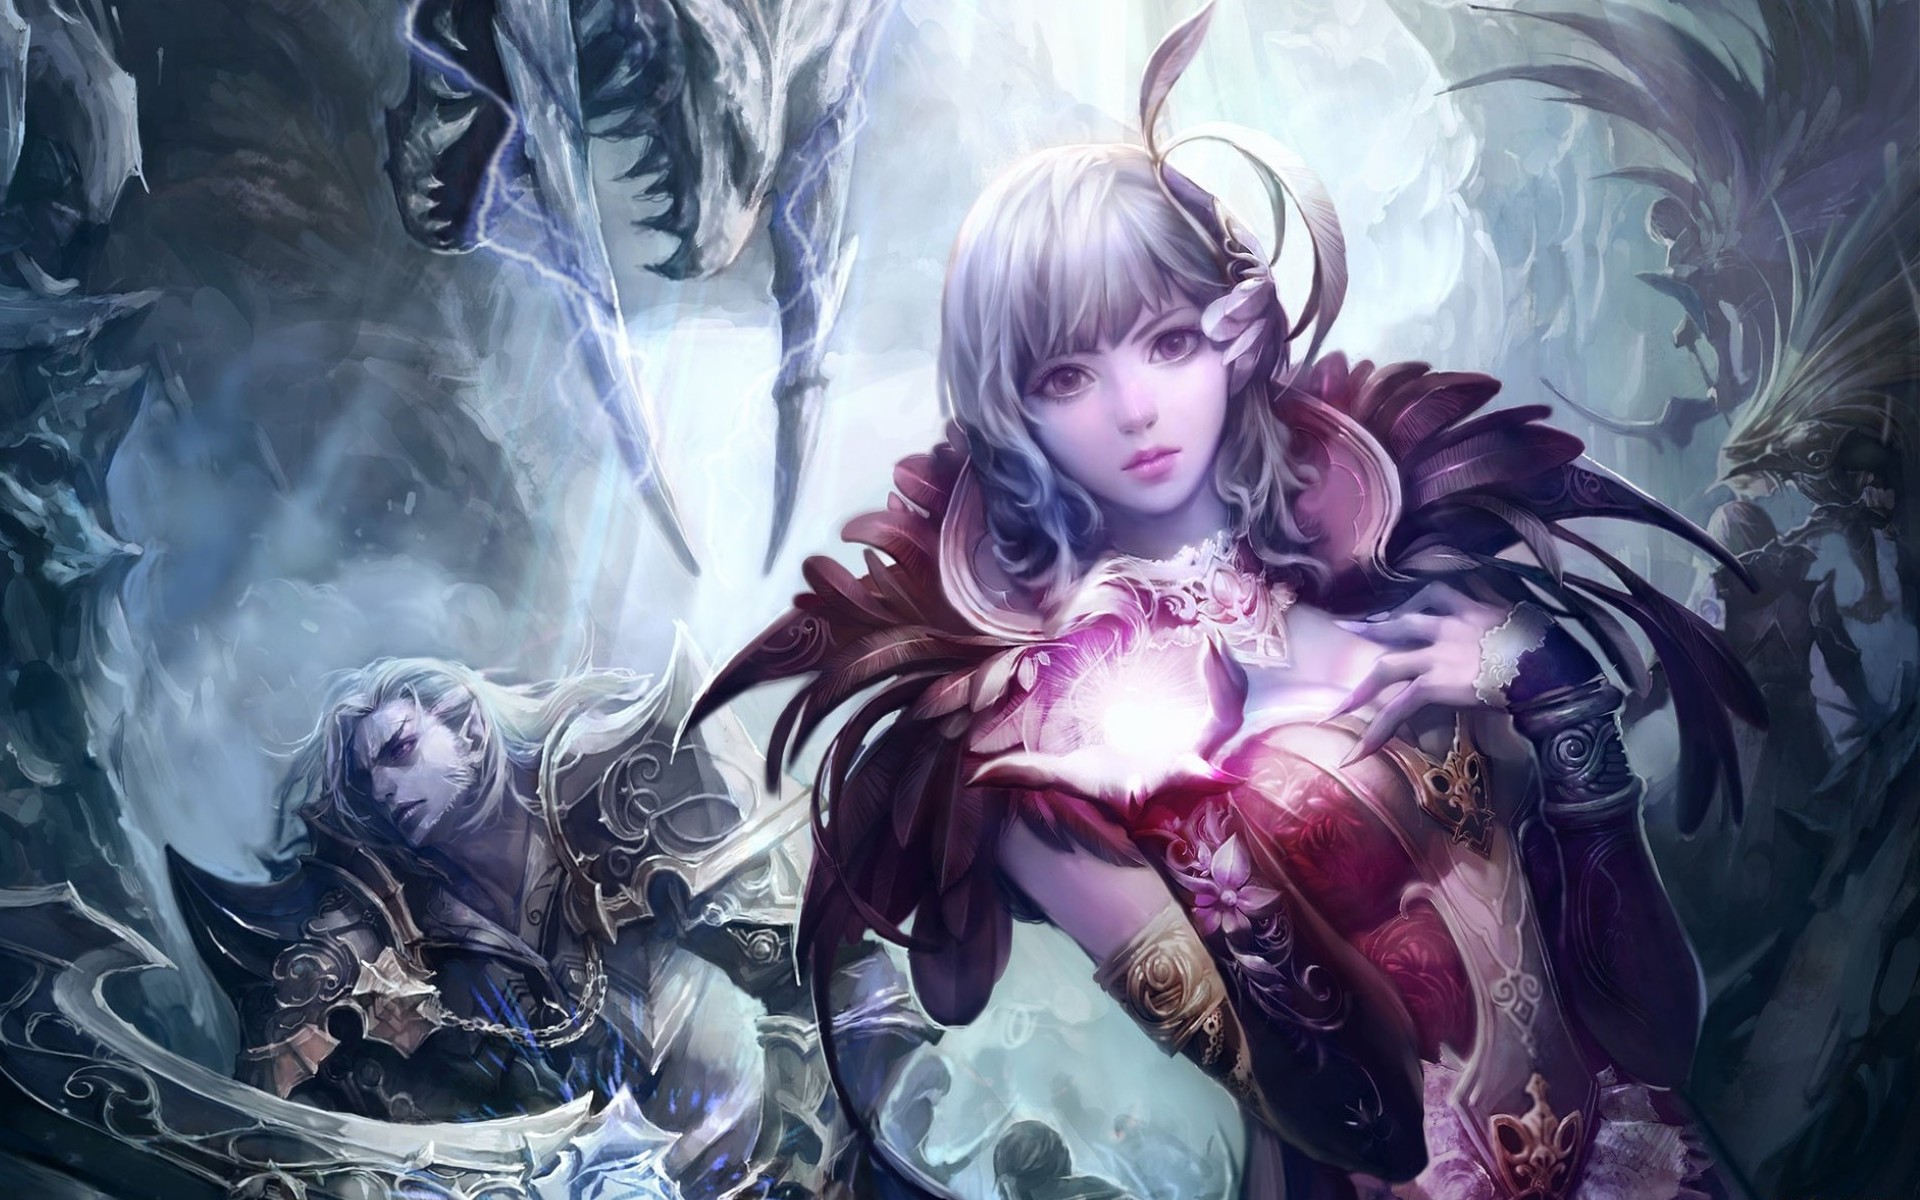 Aion: Tower of Eternity Art